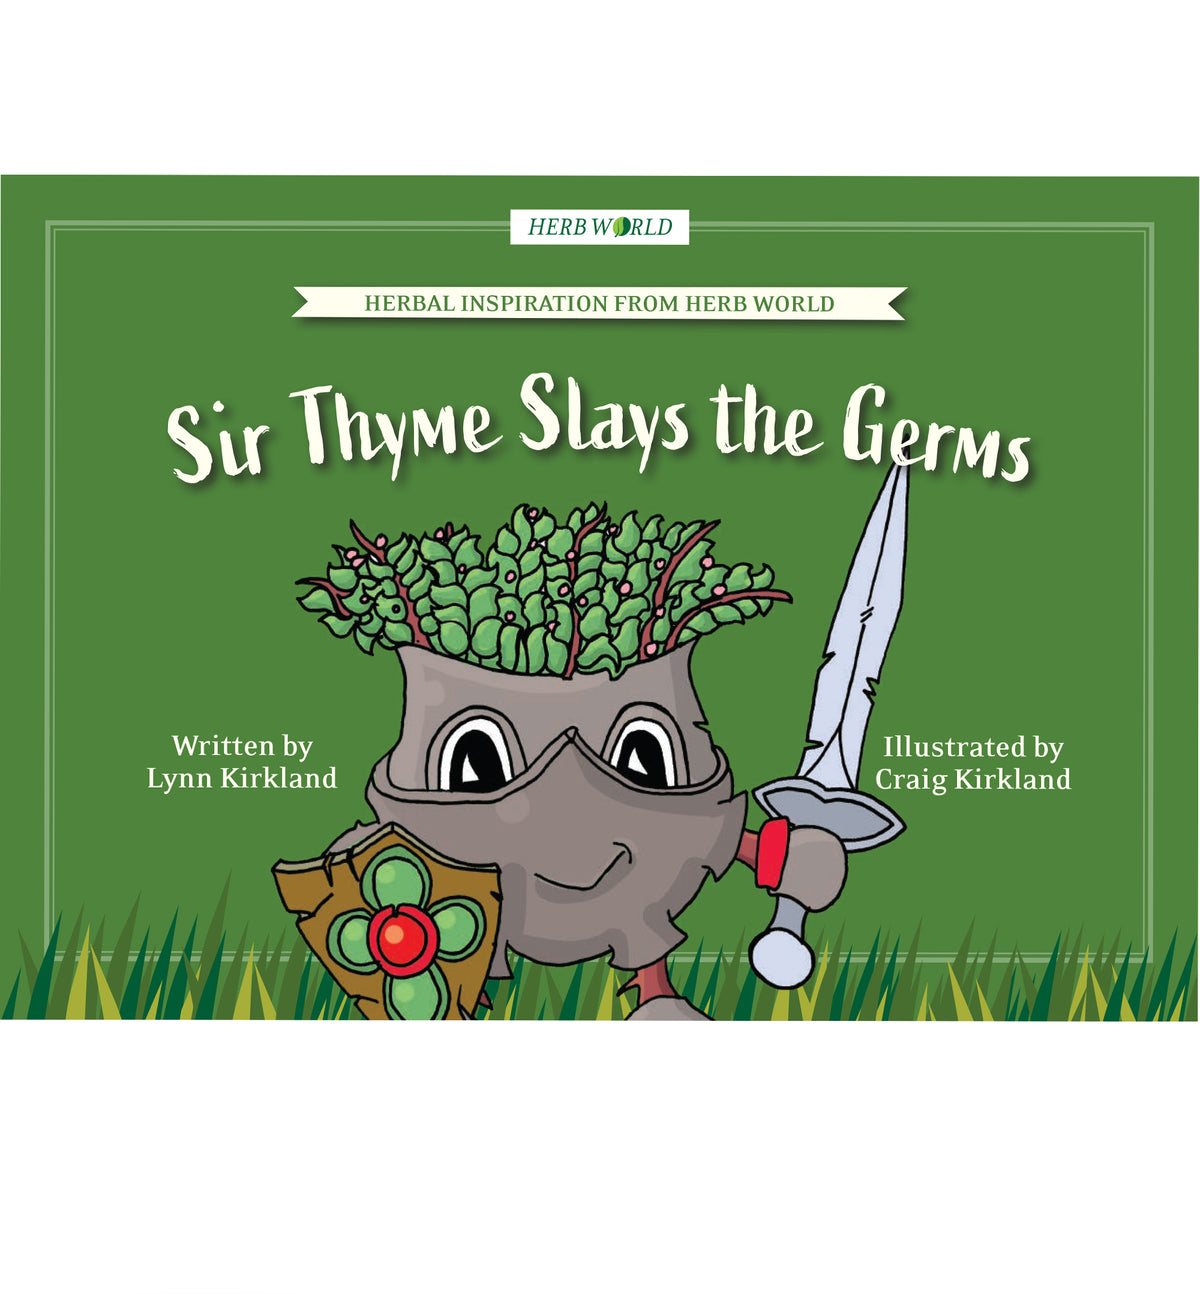 Herb World - Sir Thyme Slays the Germs Book primary